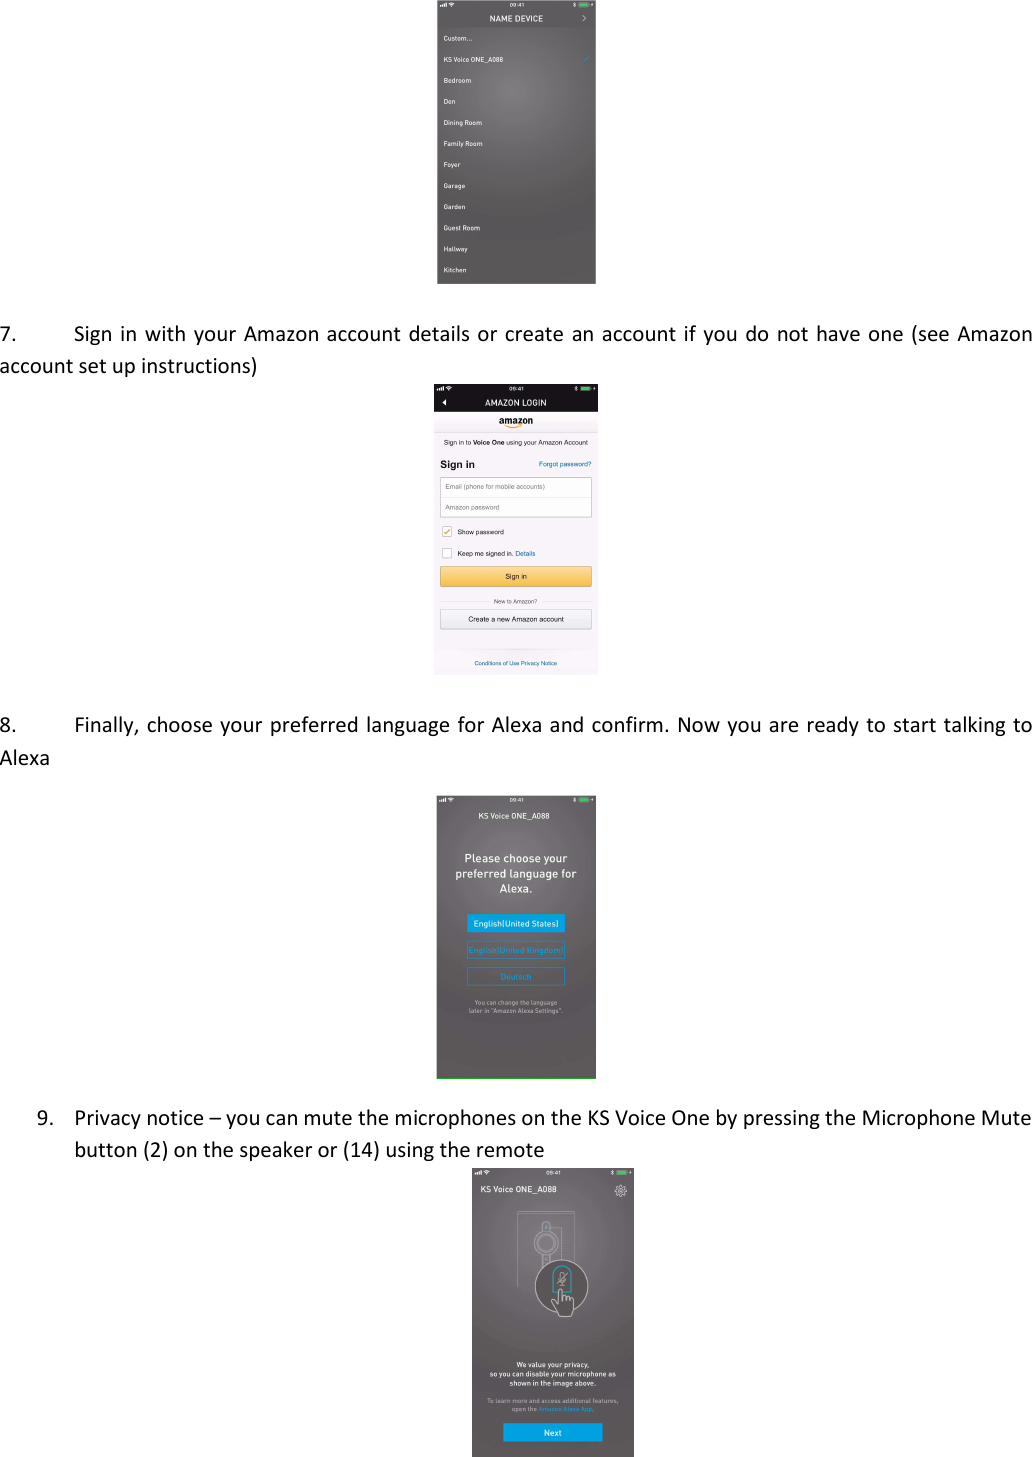   7. Sign in with your  Amazon account details or create  an account if  you do not have one (see Amazon account set up instructions)    8. Finally, choose your preferred language for Alexa and confirm. Now you are ready to start talking to Alexa  9. Privacy notice – you can mute the microphones on the KS Voice One by pressing the Microphone Mute button (2) on the speaker or (14) using the remote  